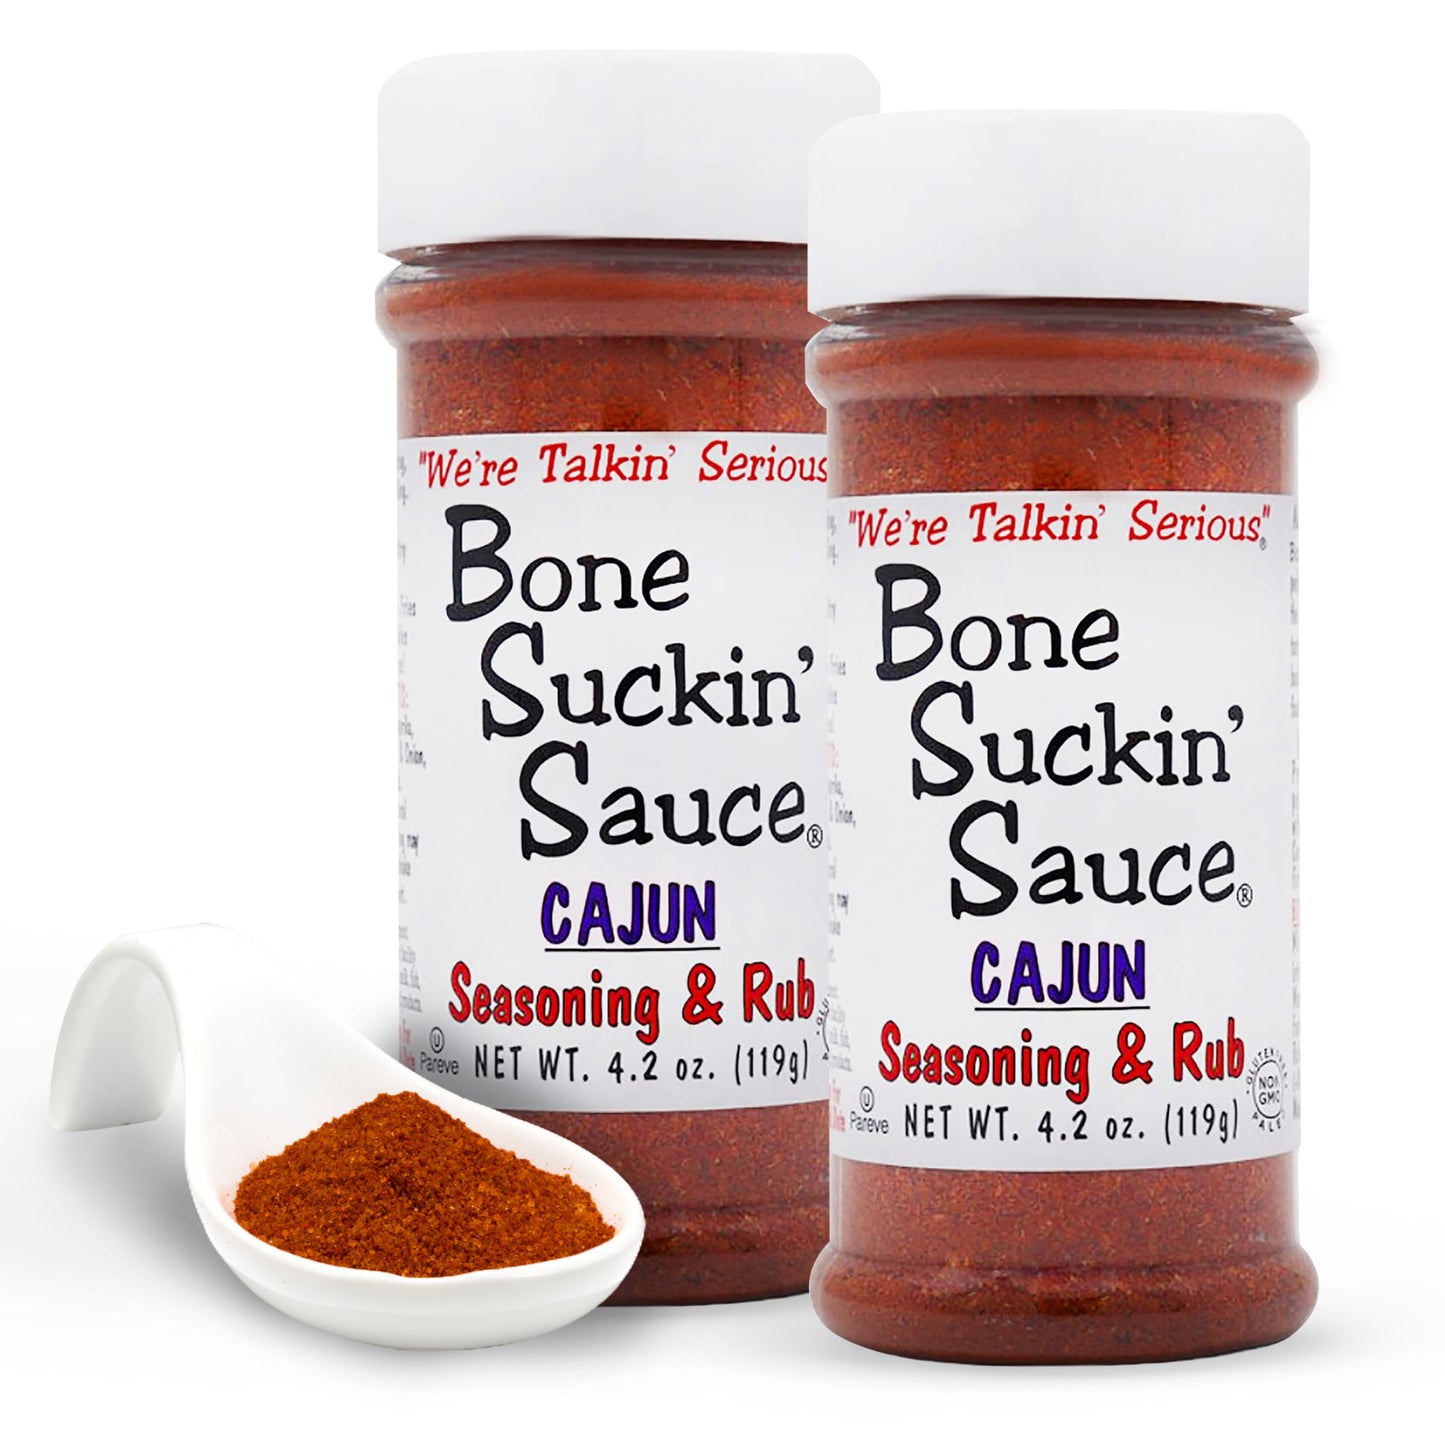 Bone Suckin'® Cajun Seasoning & Rub, 4.2 oz., is the perfect blend of Cajun spices & herbs along with the right amount of heat. It makes your food taste great, gets friends talking & coming back for more! Use generously & your Cajun food will be "Bone Suckin'® Good!" Use On Seafood, Poultry, Steaks, Pork, Pasta, French Fries, Rice, Vegetables, Gumbos, Jambalayas & more! 2 pack